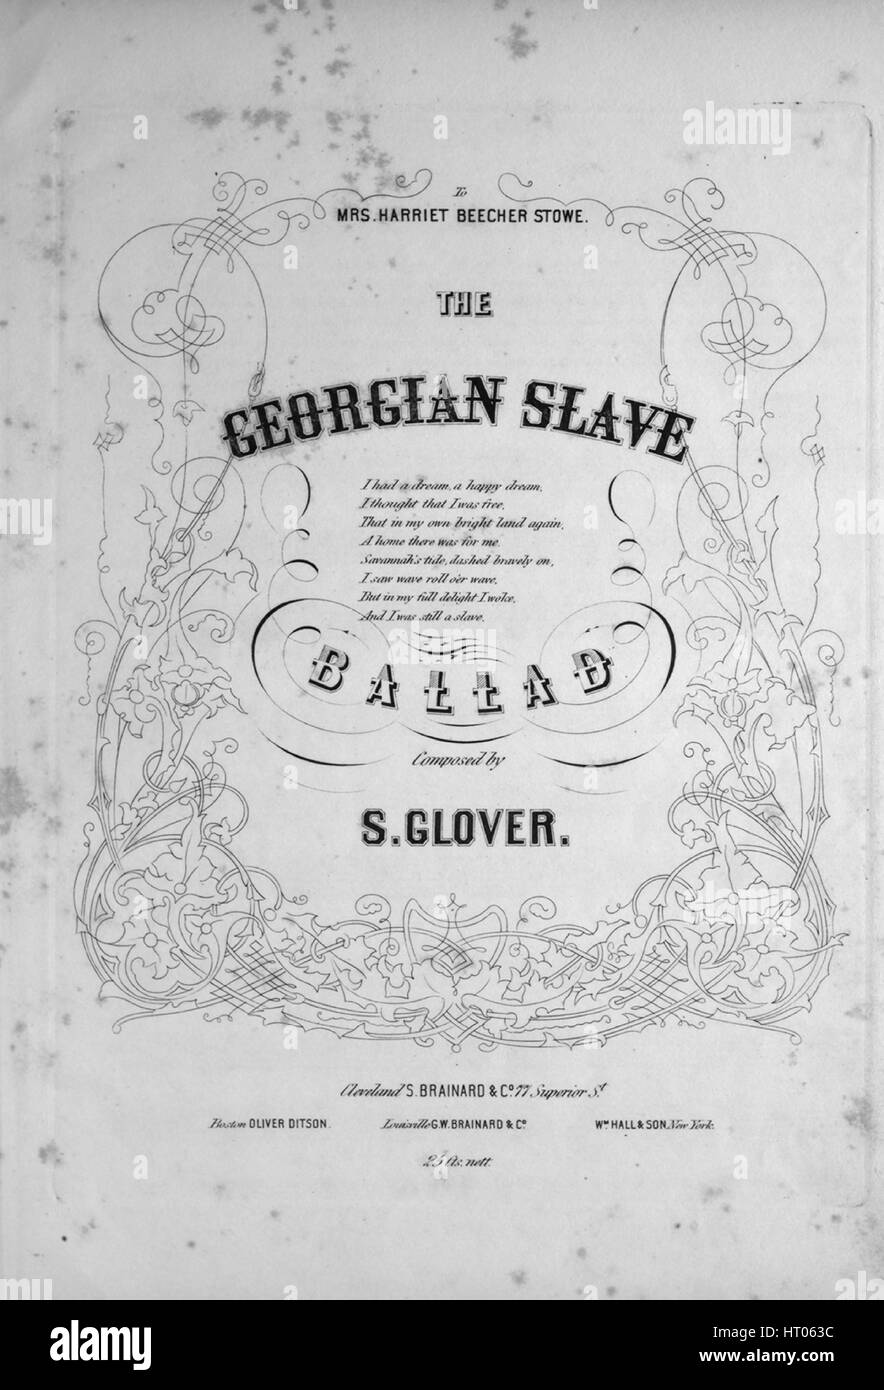 Sheet music cover image of the song 'The Georgian Slave Ballad', with original authorship notes reading 'Composed by S Glover', United States, 1852. The publisher is listed as 'S. Brainard and Co., 77 Superior St.', the form of composition is 'strophic', the instrumentation is 'piano and voice', the first line reads 'I had a dream a happy dream, I thought that I was free', and the illustration artist is listed as 'None'. Stock Photo